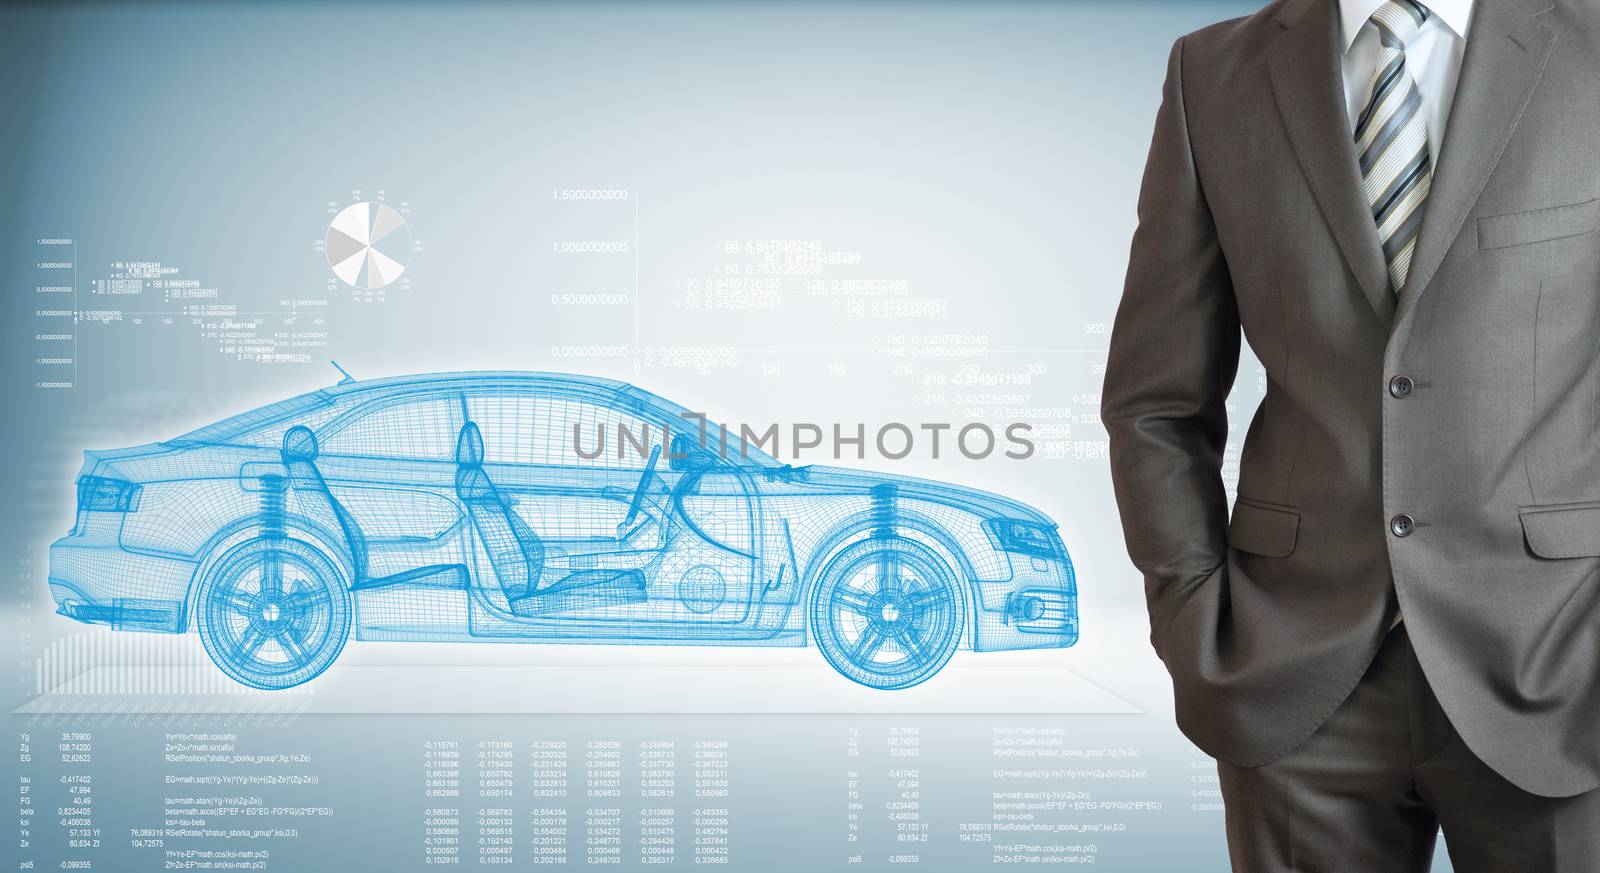 Businessman standing with hands in pockets. On background of the high-tech wire frame car and graphs